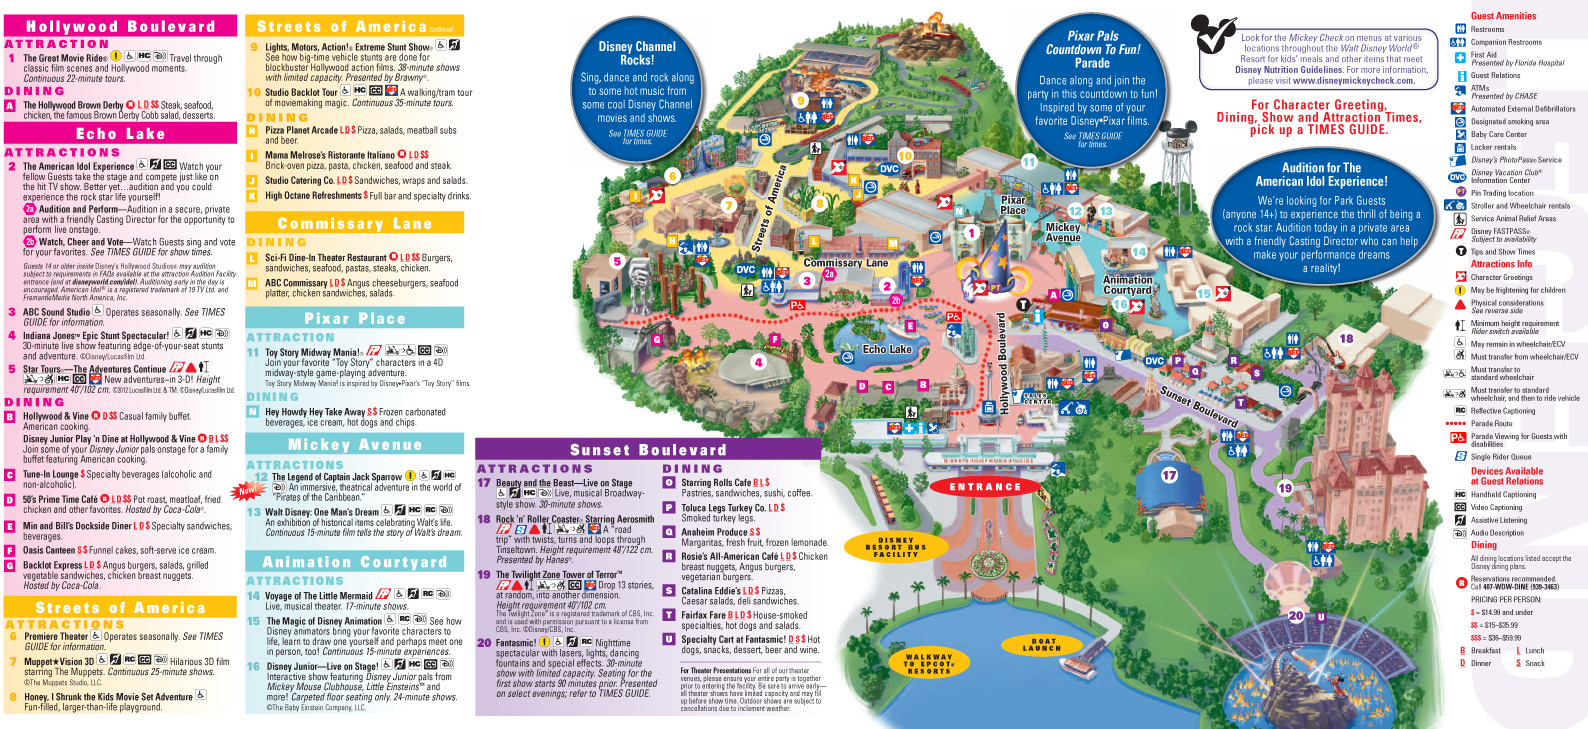 New Park Maps Released Today Include My Disney Experience 